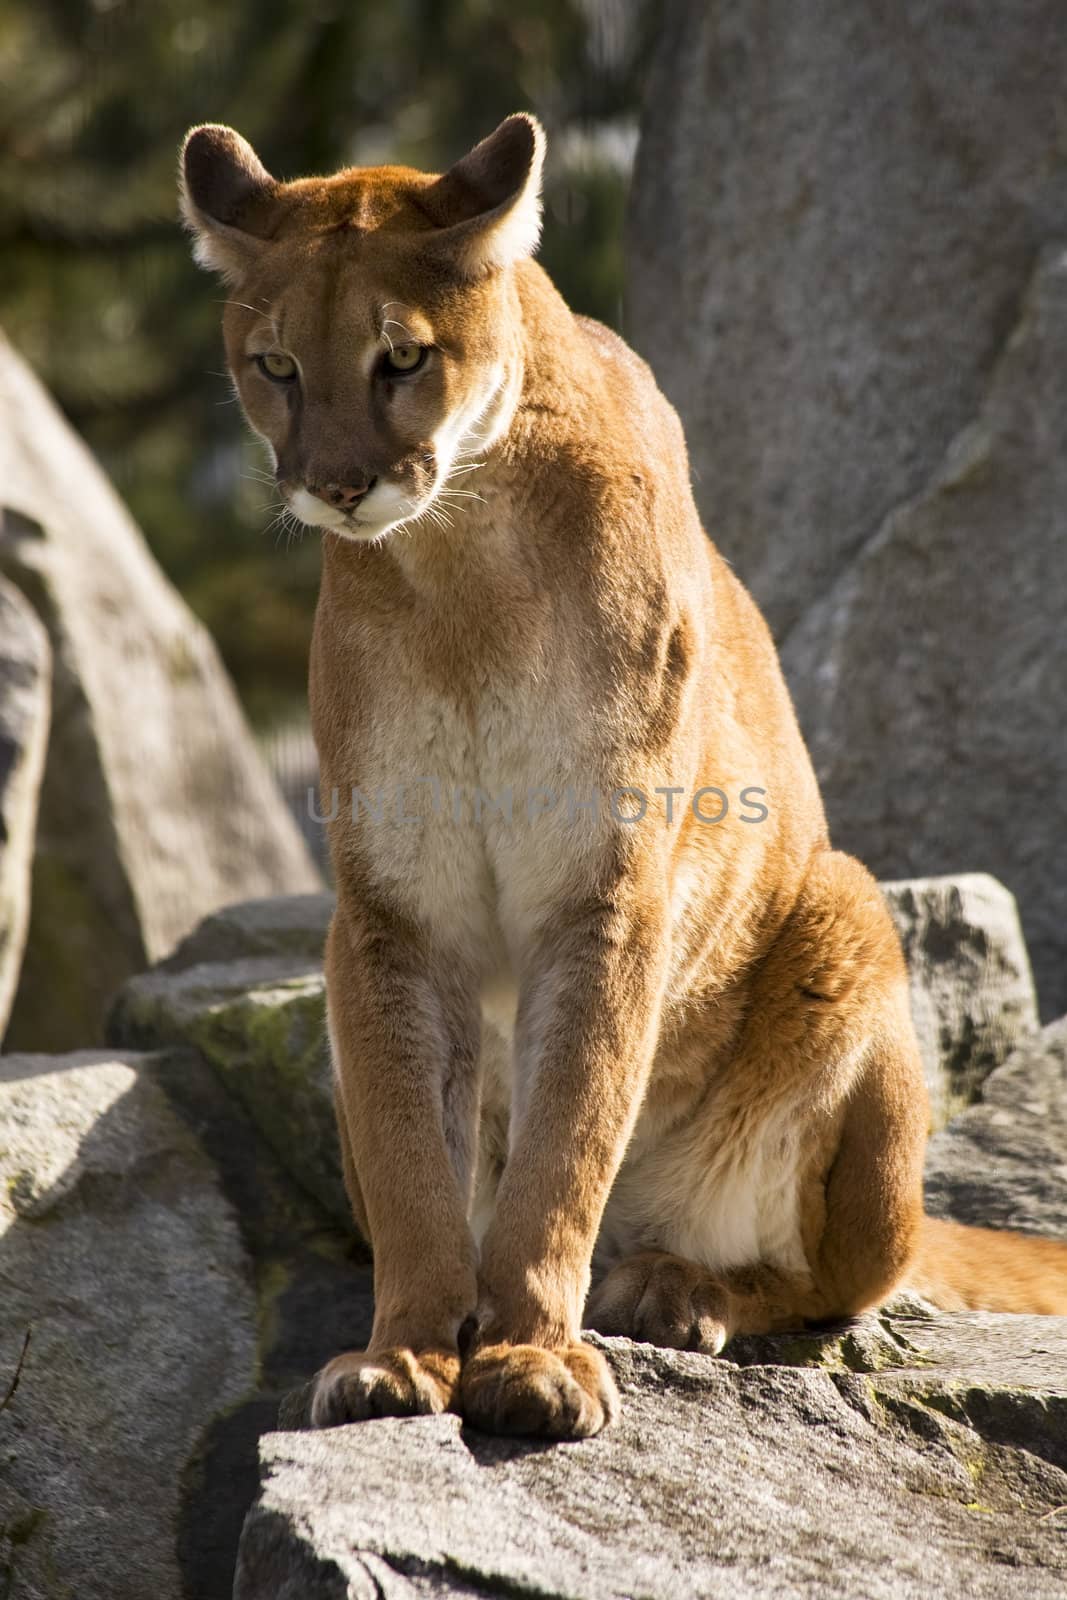 Mountain Lion Cougar Looking for Prey.  The Mountain Lion is a hunter and is always looking for movement to go after.

Resubmit--In response to comments from reviewer have further processed image to reduce noise and sharpen focus.